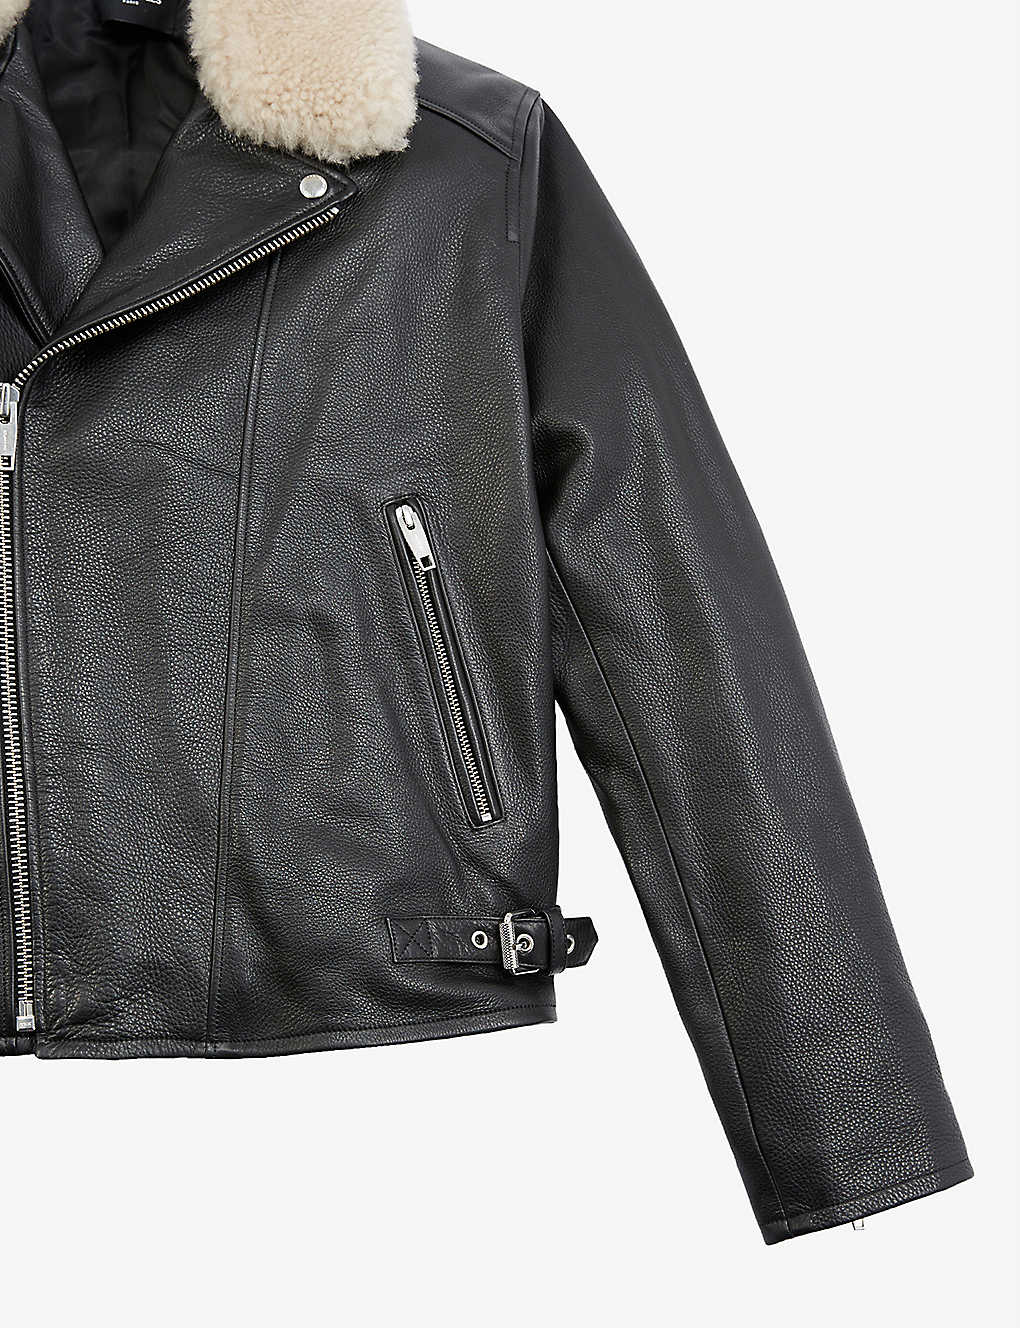 Men’s Black Leather Shearling Collared Jacket